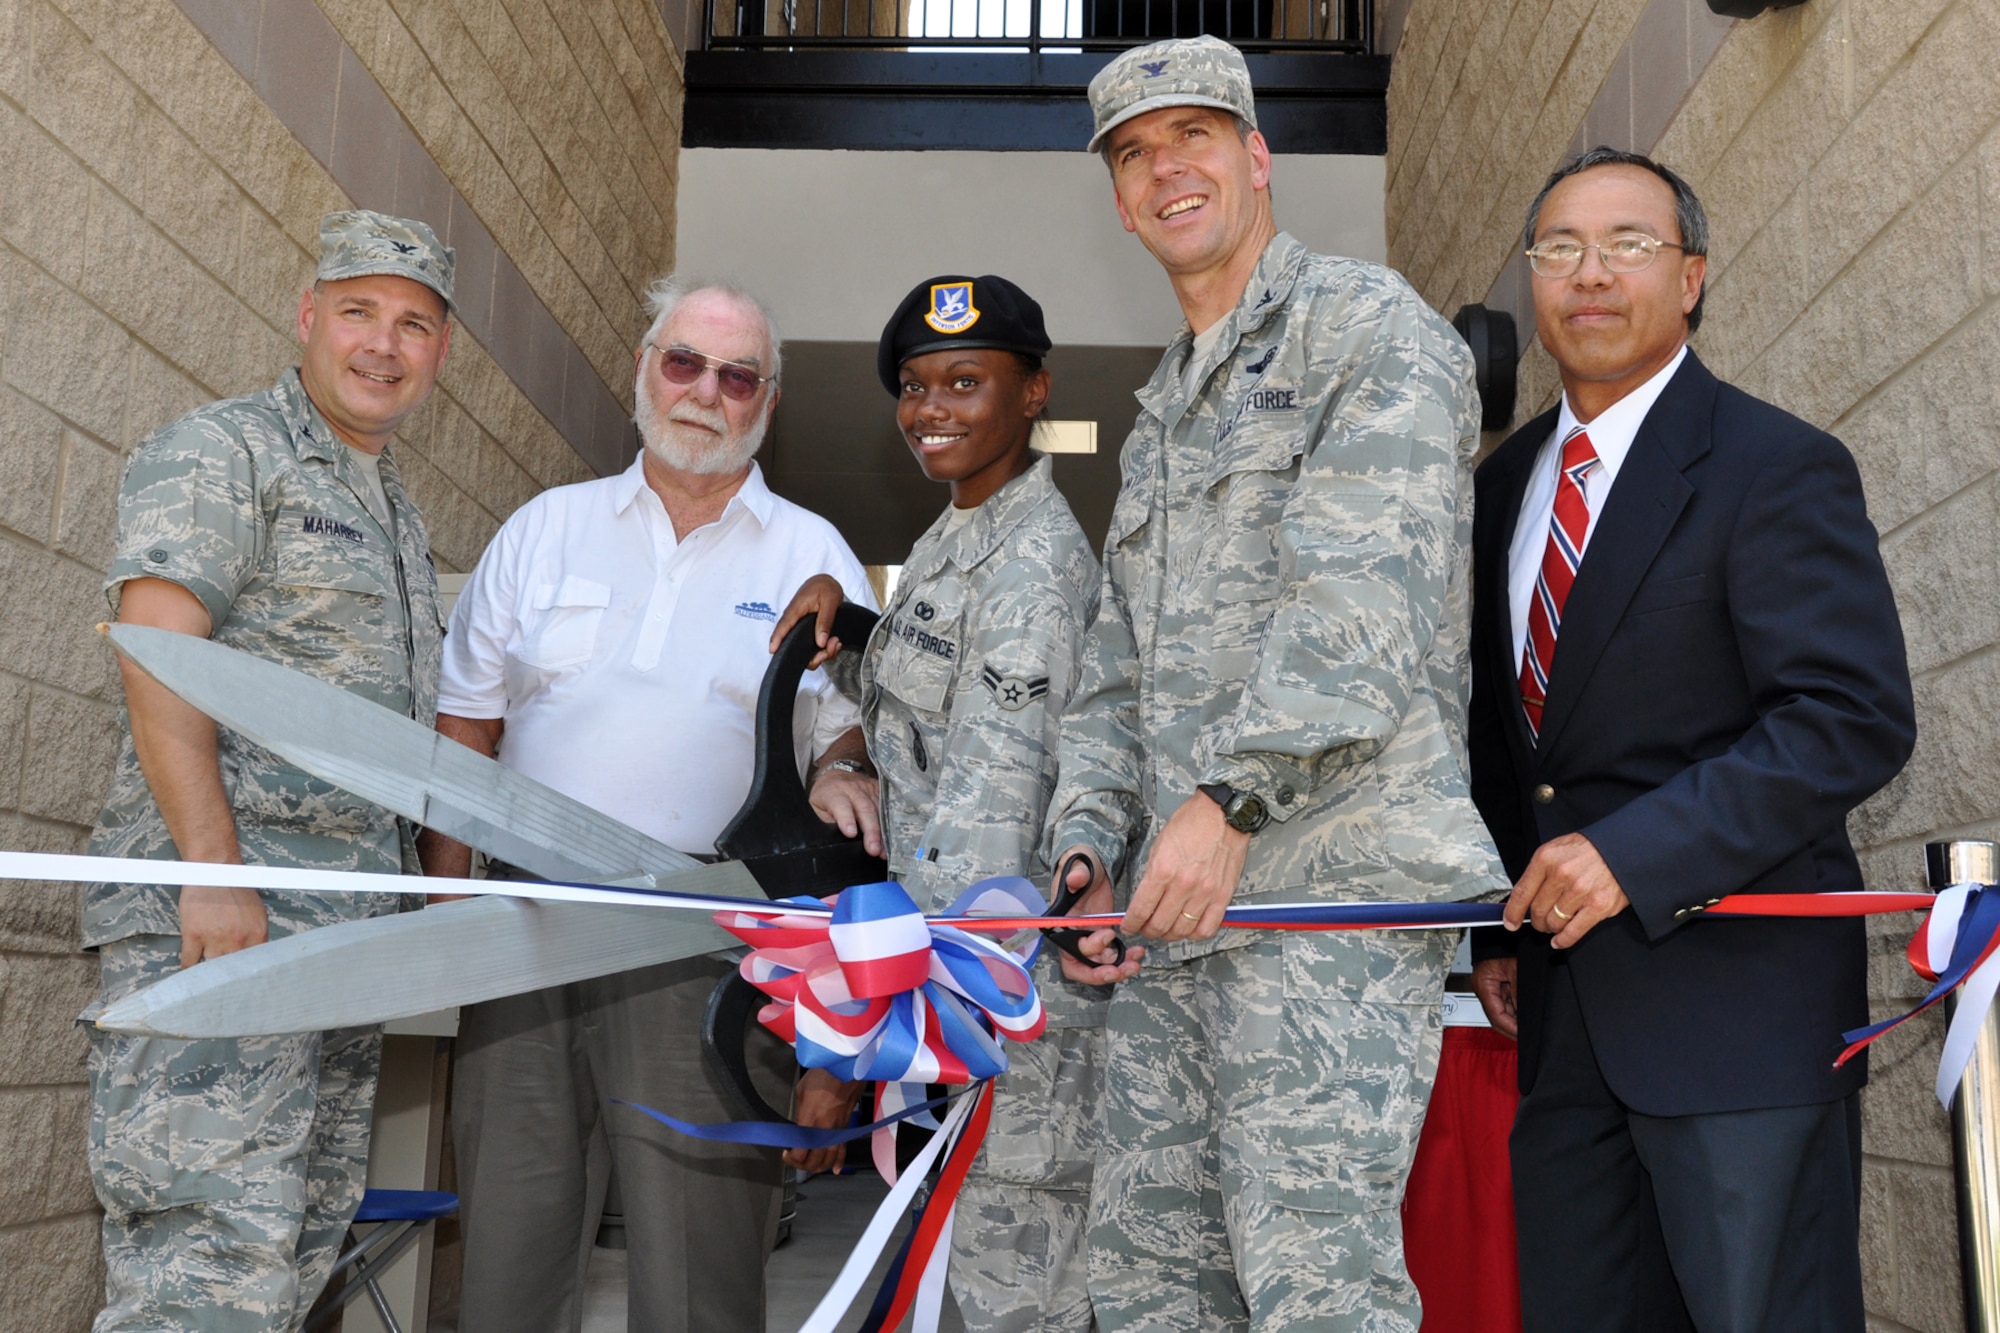 EGLIN AIR FORCE BASE, Fla. -- (From left) Col. David Maharrey, 96th Civil Engineer Group commander, Airman 1st Class Tamtra Chaison, 96th Security Forces Squadron, and Col. Bruce McClintock, 96th Air Base Wing commander cut the cermonial ribbon. The completion of the three-quad Dorm 18 was commemorated June 18, with a ribbon cutting ceremony followed by a tour of the rooms. Airmen from the 96th Security Forces Squadron and 96th Civil Engineer Group will be the first to occupy the new quad dorms.The The total cost of construction of the three dorm complex topped 13.5 million and the 96th Air Base Wing invested $10,000 in quality of life items like individual air control for each room and individual refrigerators. (U.S. Air Force photo/ Airman Anthony Jennings)